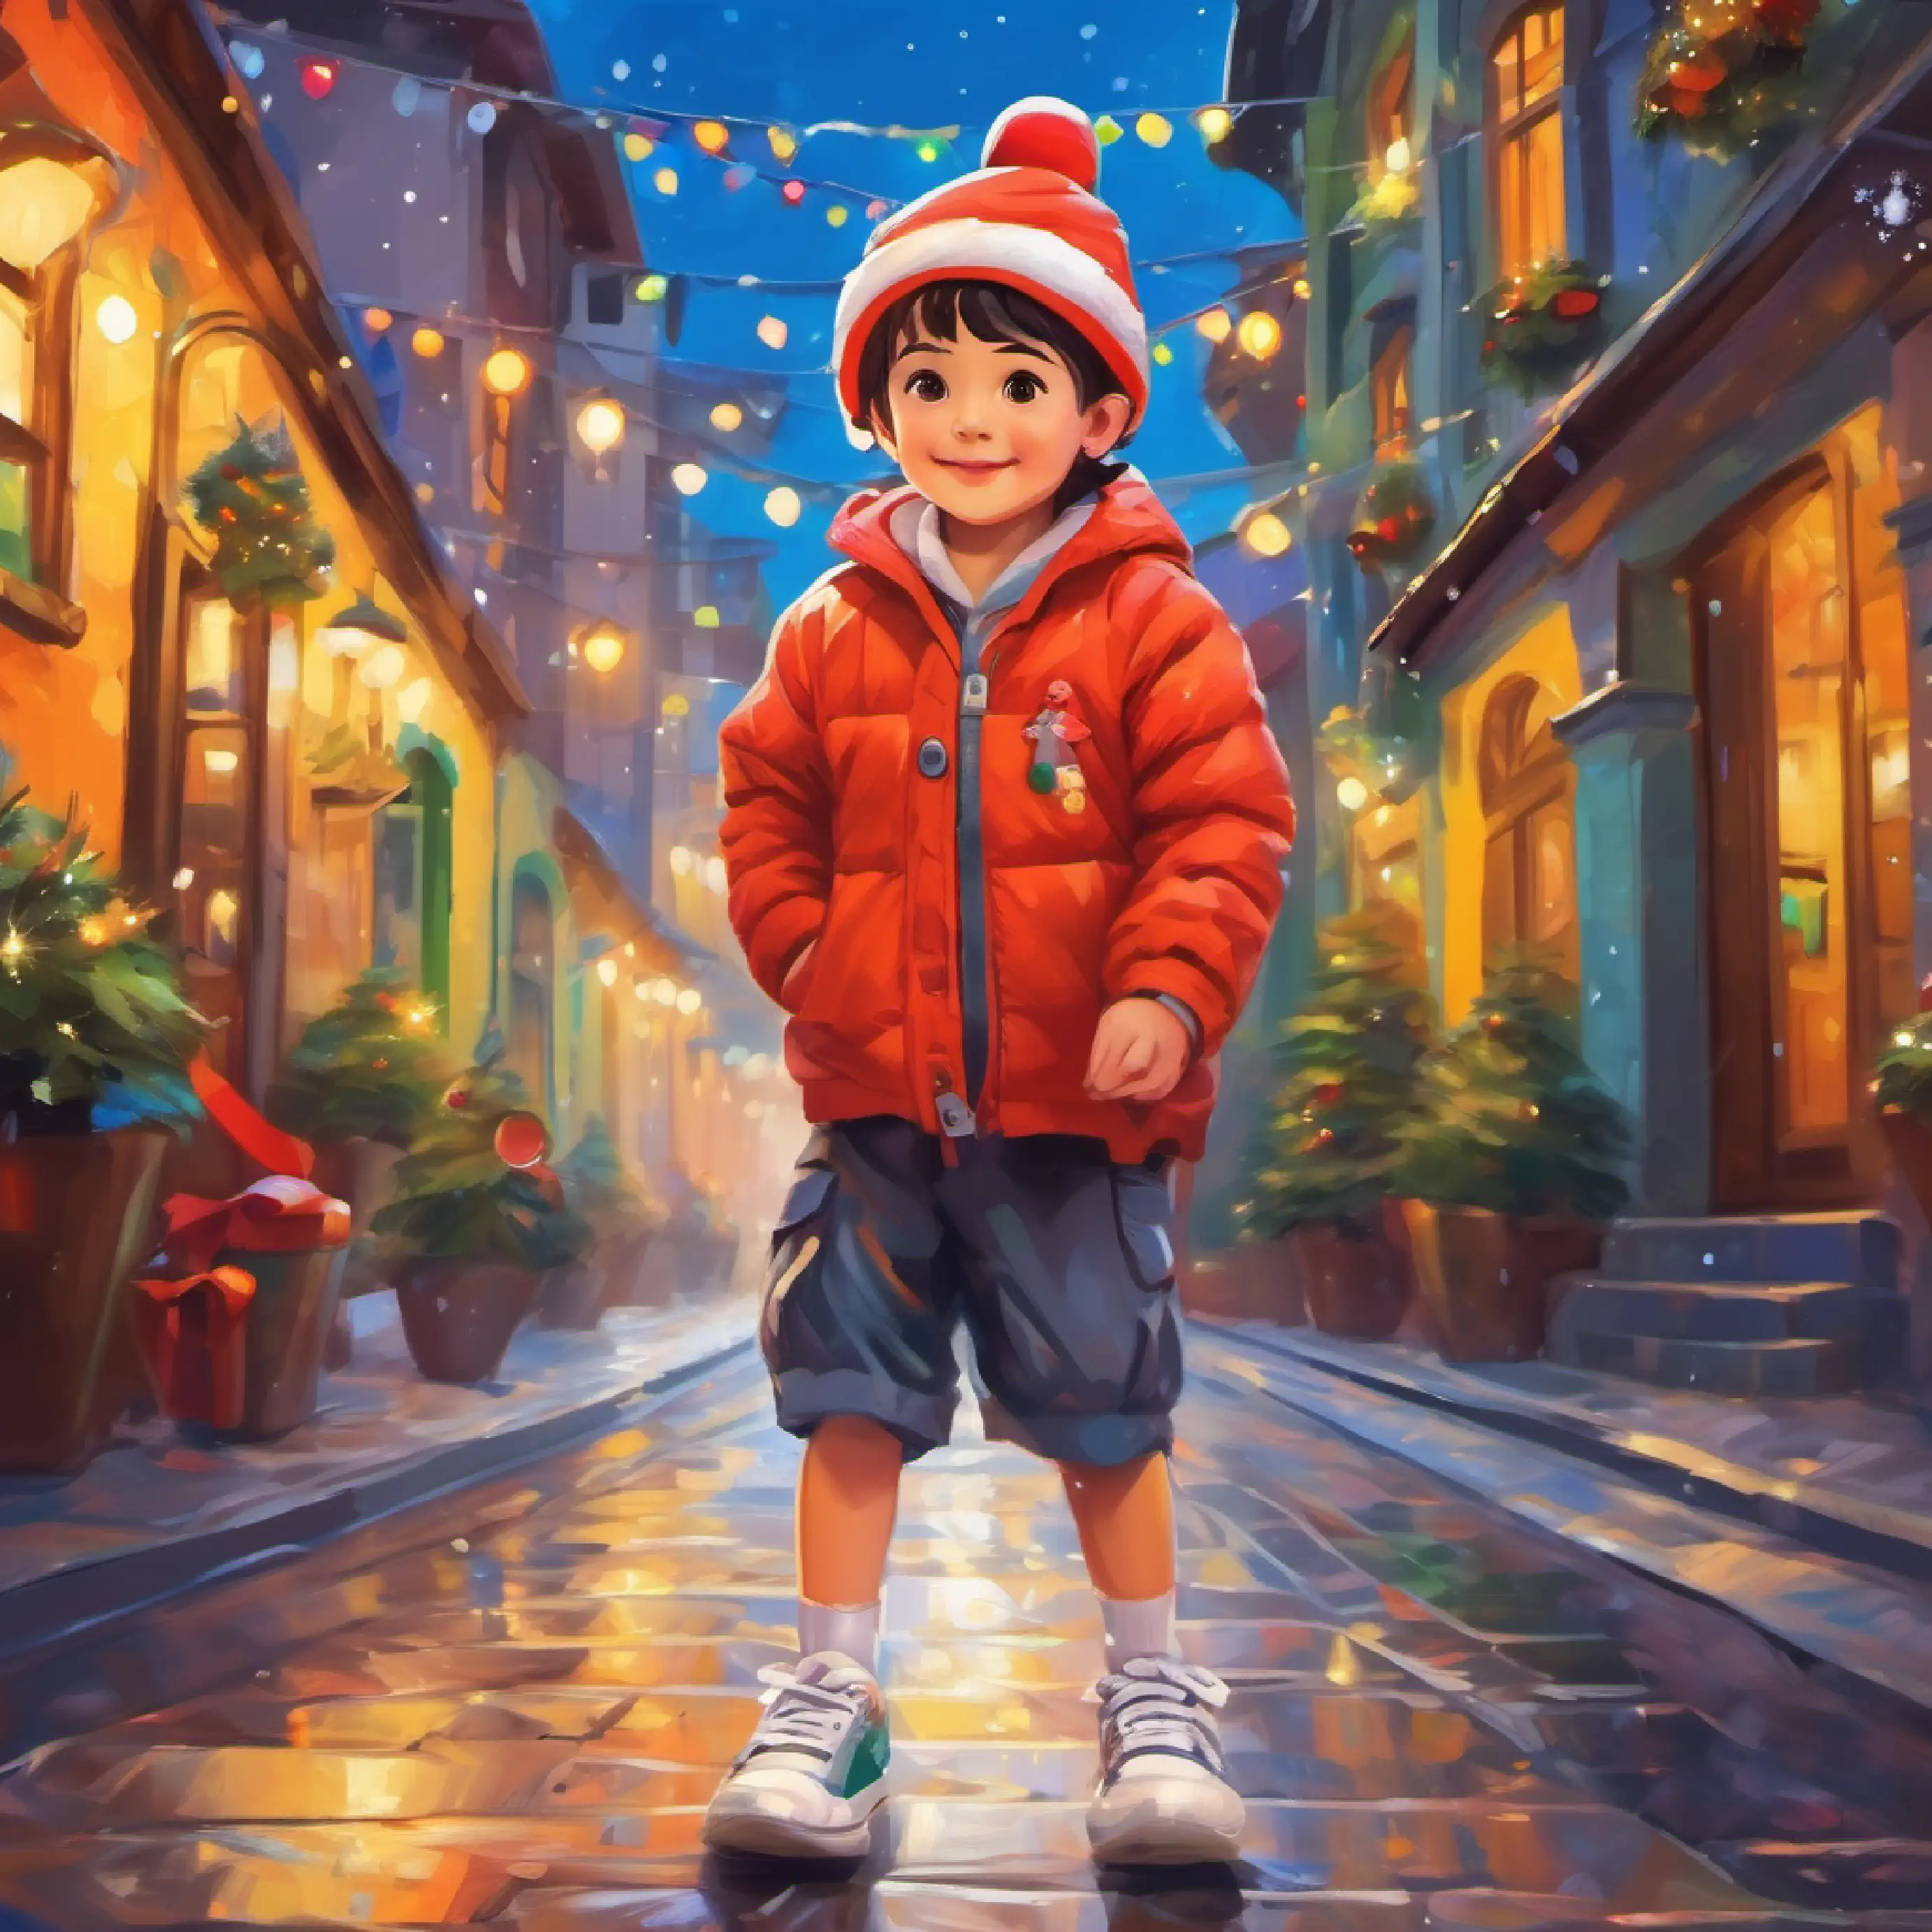 Introducing Child with joyful eyes, wears colorful clothes and sneakers in a vibrant town.